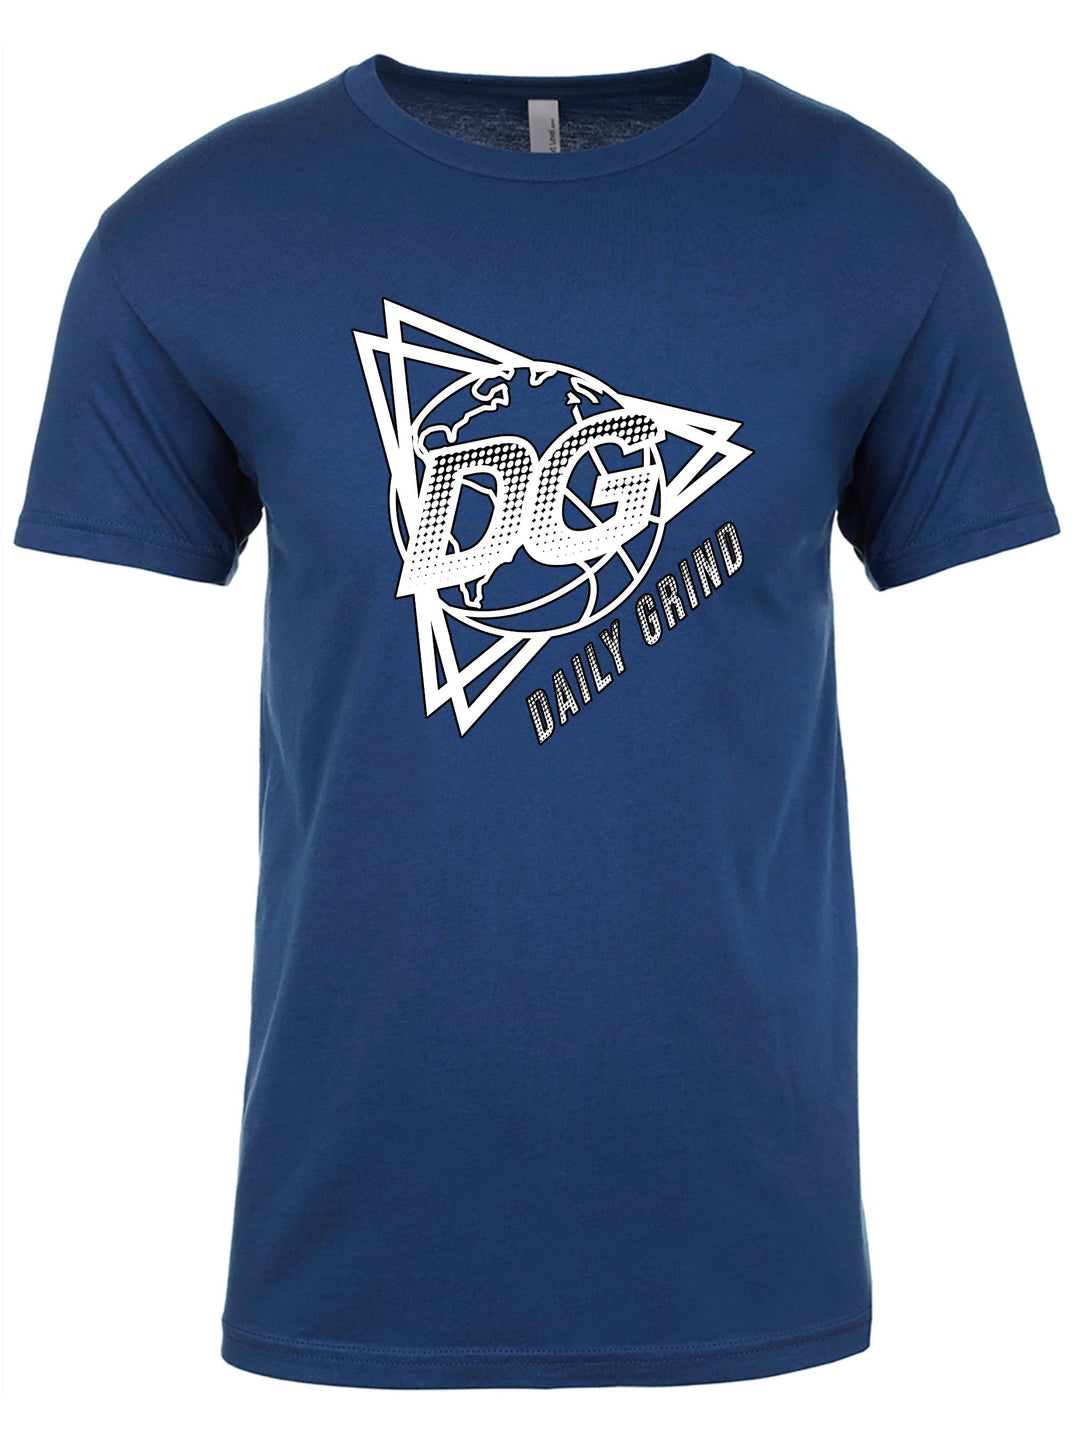 Daily Grind Unisex T-Shirt